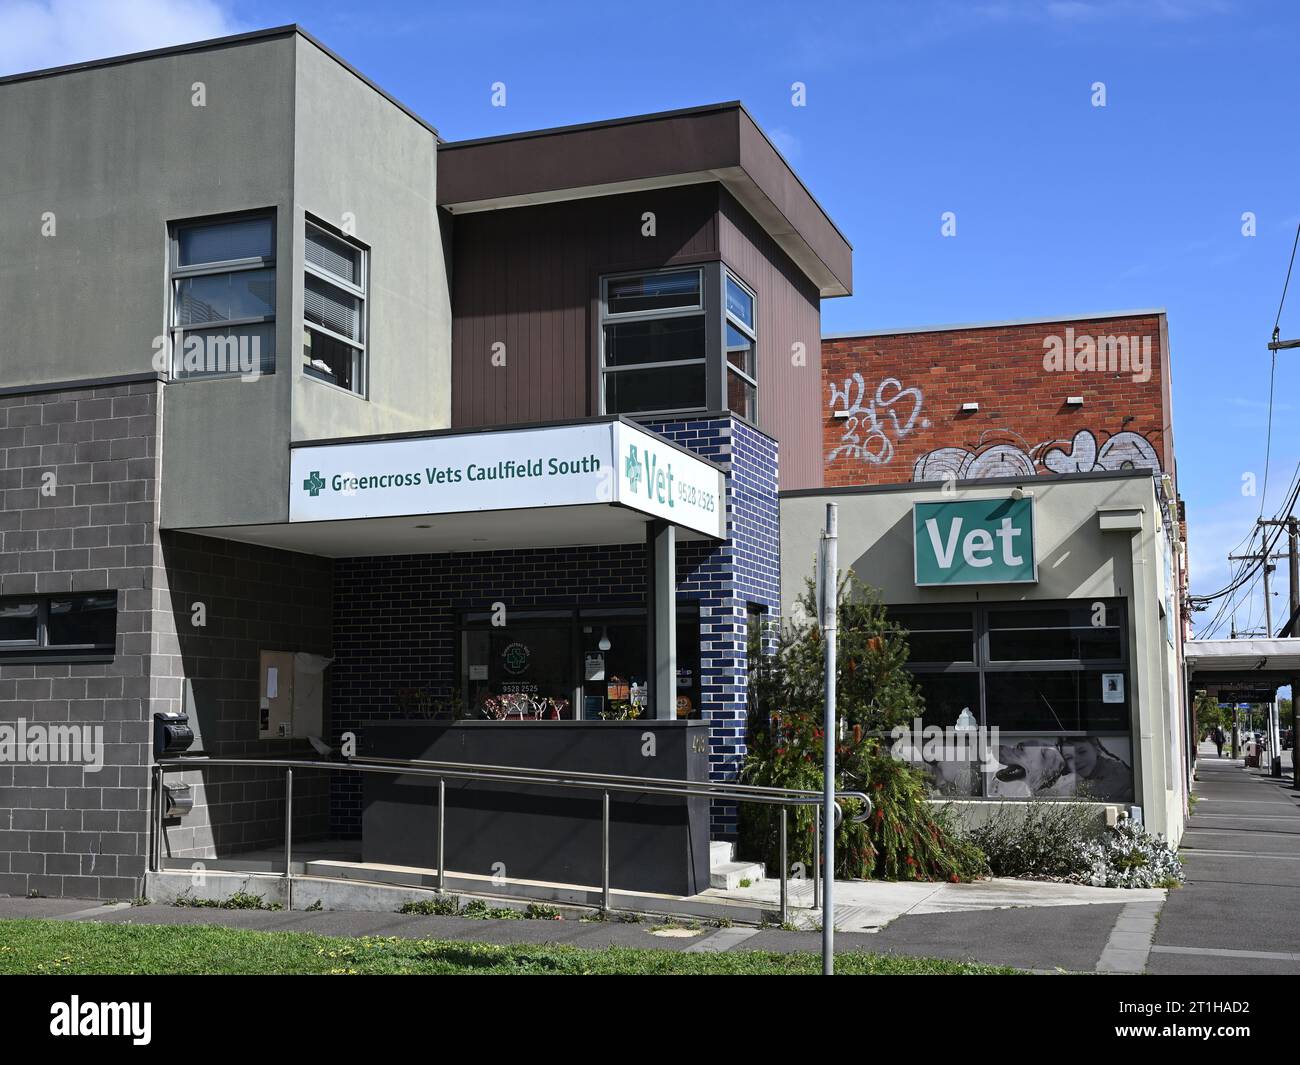 Exterior of a Greencross Vets building during a sunny day Stock Photo